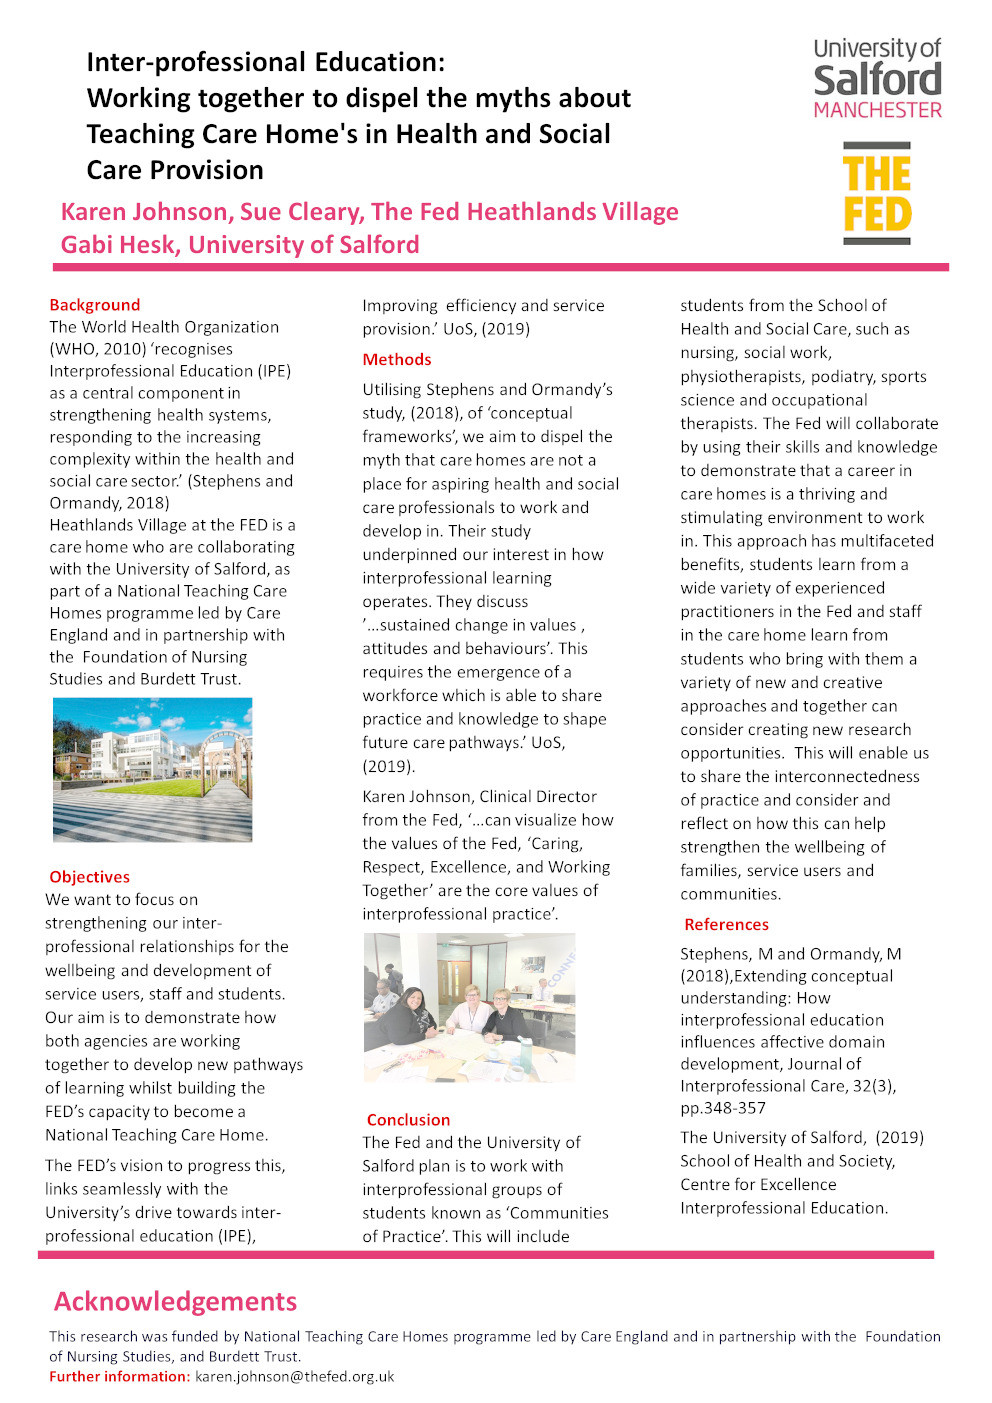 Inter-professional education : working together to dispel the myths about teaching care homes in health and social care provision Thumbnail